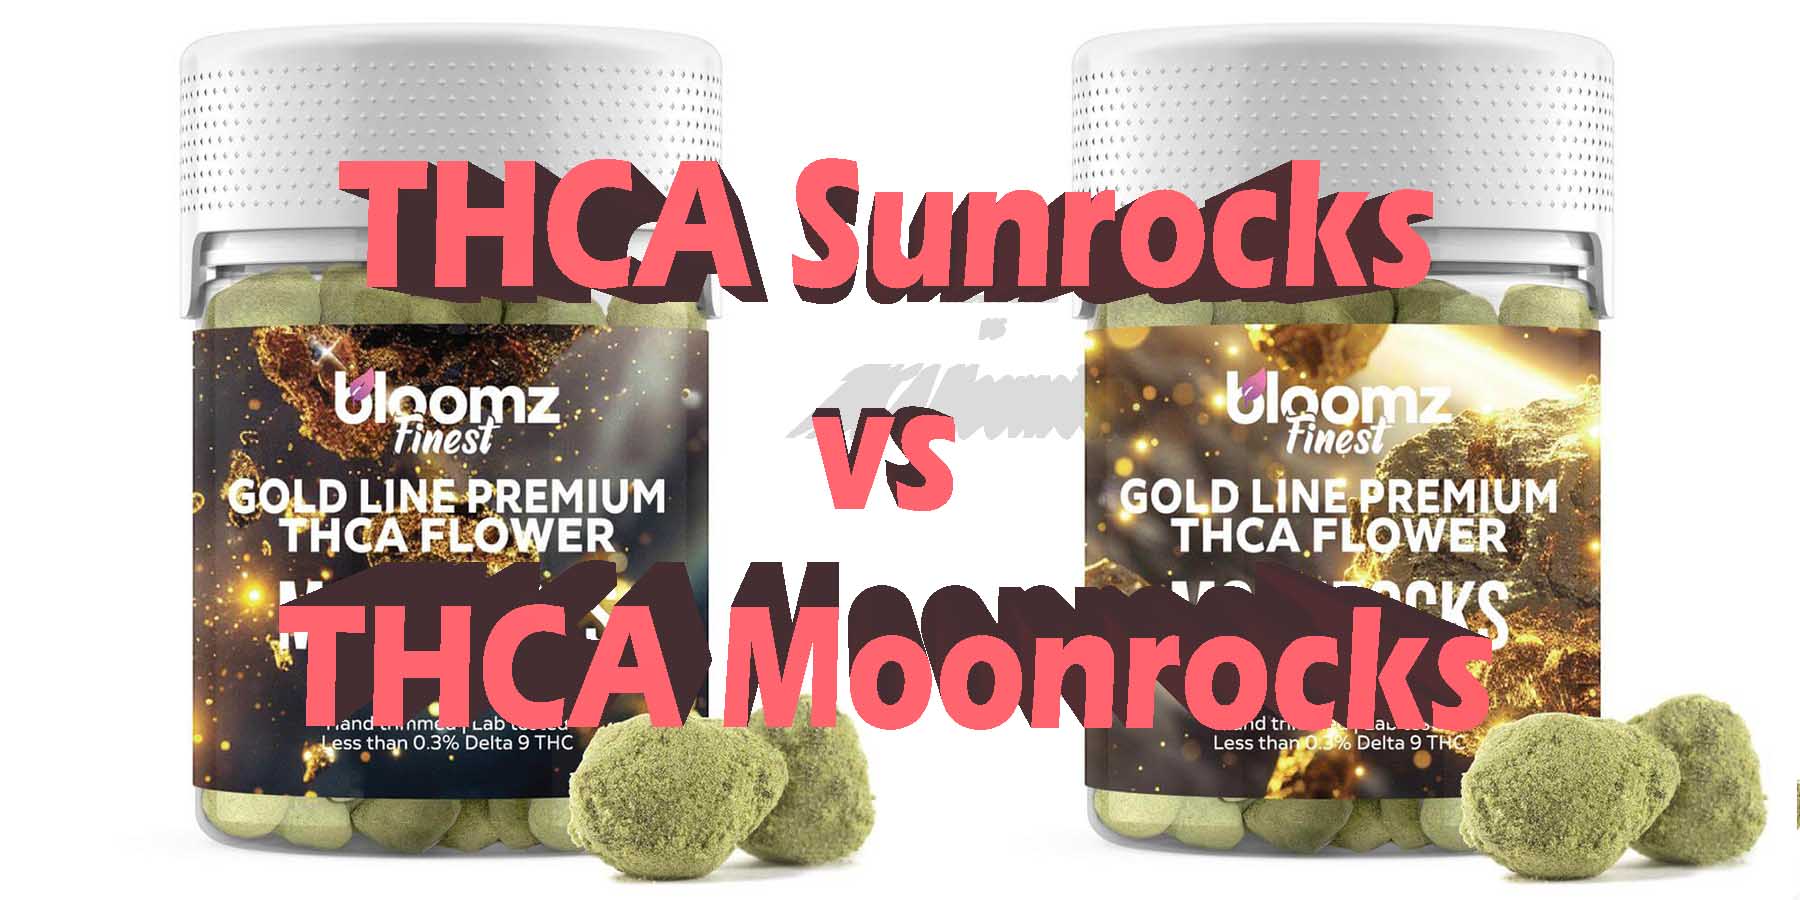 A Unique Rock Solid Flower Matchup Hashrocks vs Better LowestPrice Coupon Discount For Smoking Best High Smoke Shop Online Near Me Bloomz